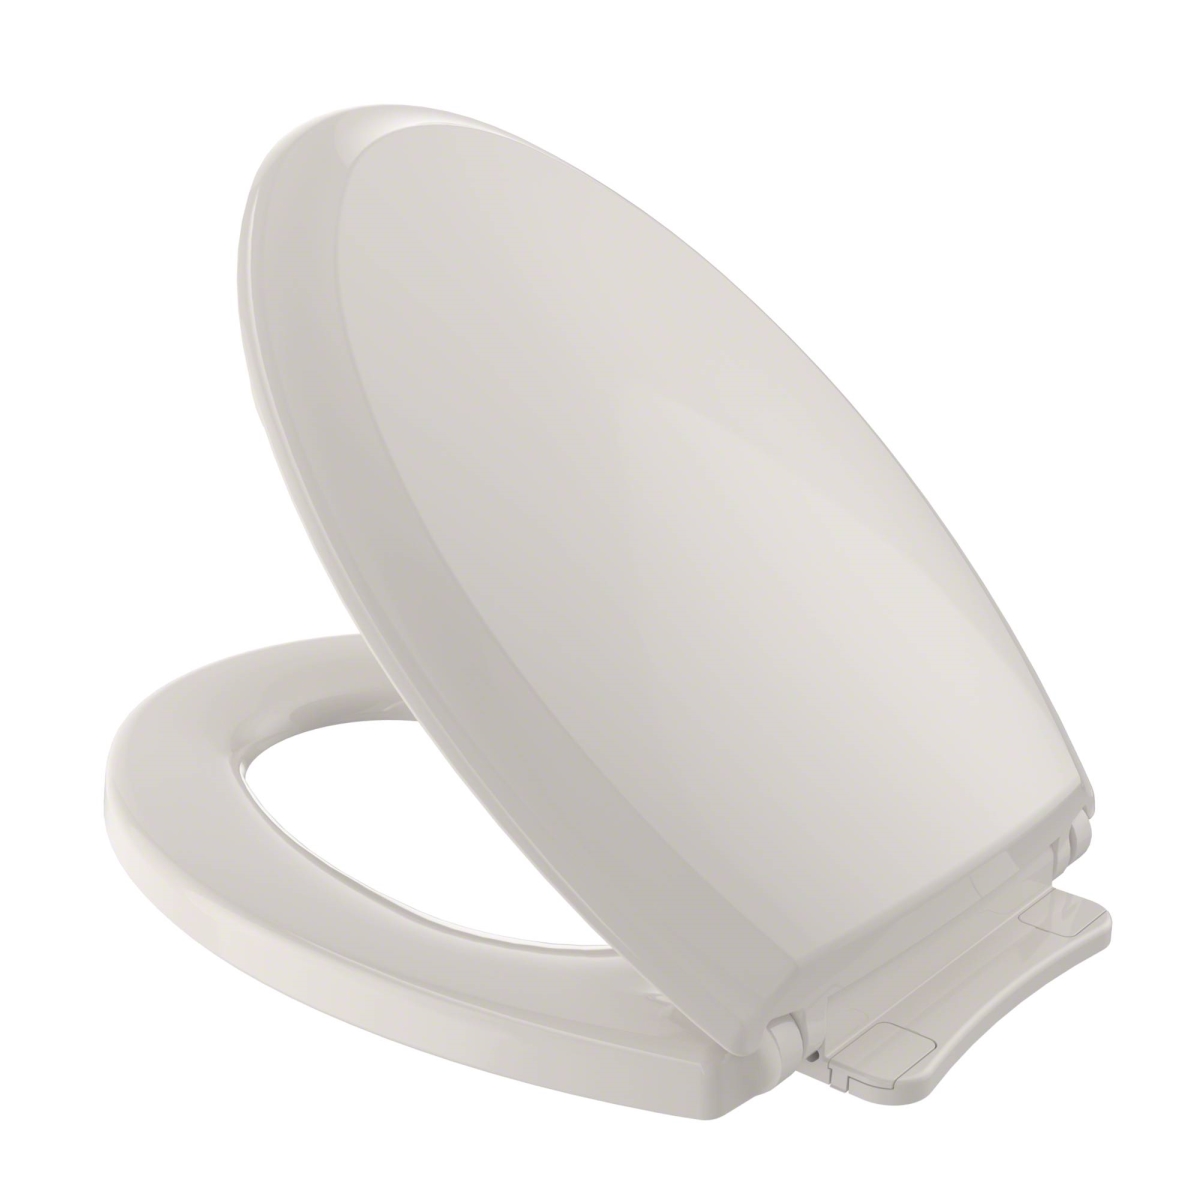 Ss224-12 Guinevere Softclose Slow Close Elongated Toilet Seat & Lid, Sedona Beige